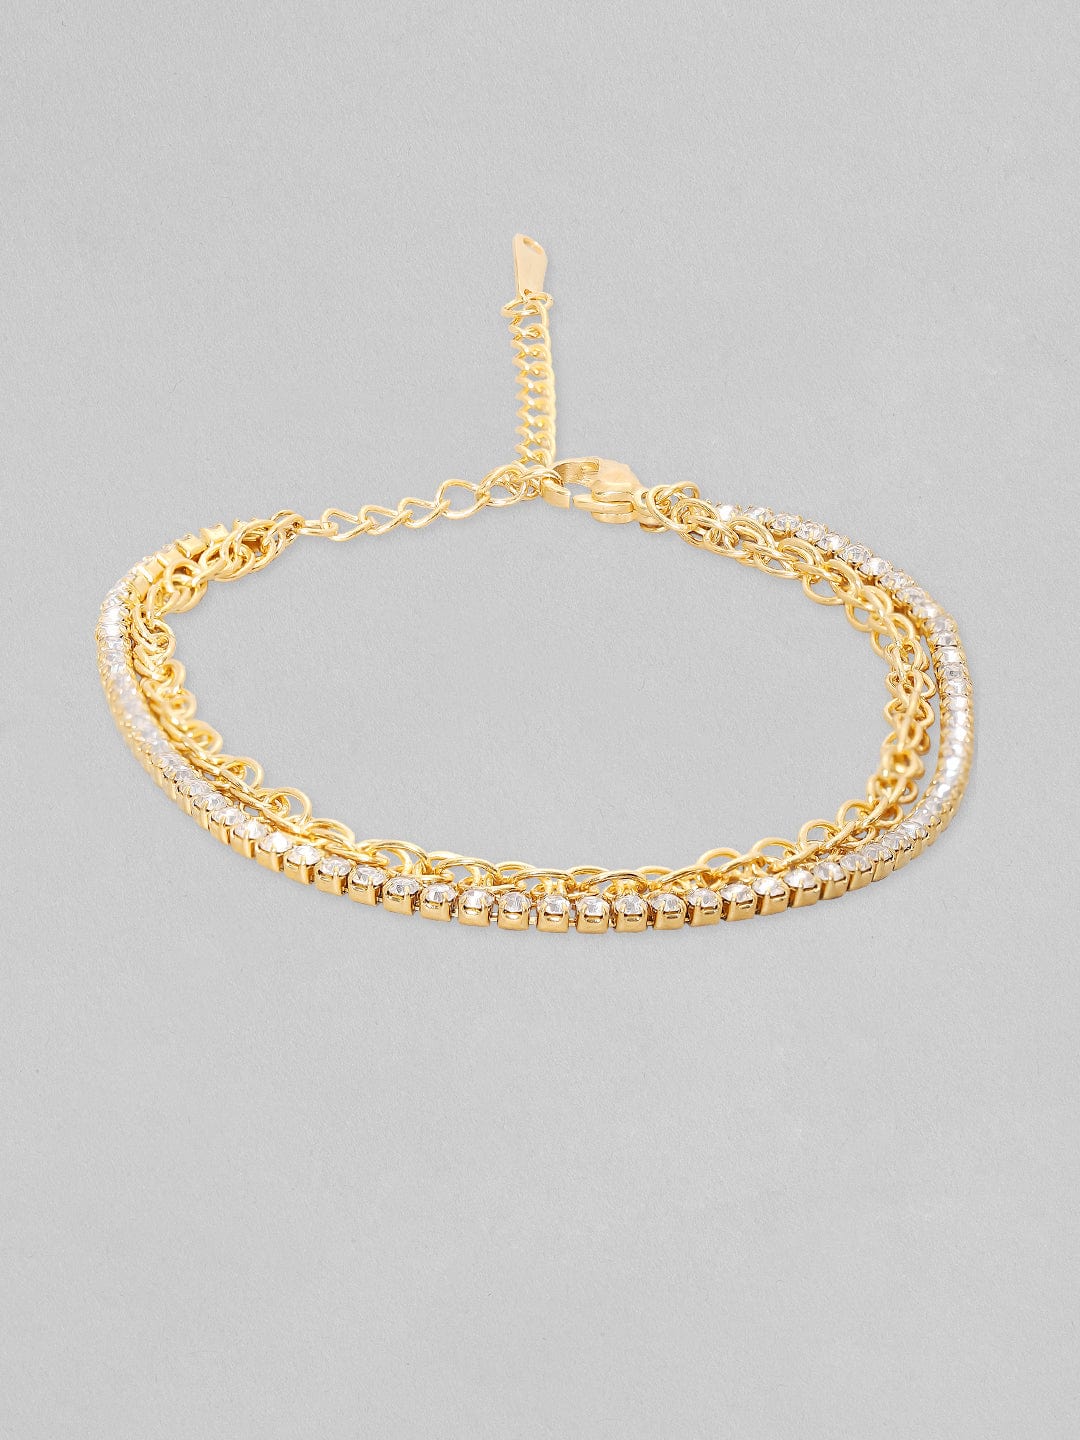 Rubans Voguish 18K Gold Plated Twisted Rope Chain With Zircons Studded Tennis Layered Necklace Set Bangles & Bracelets